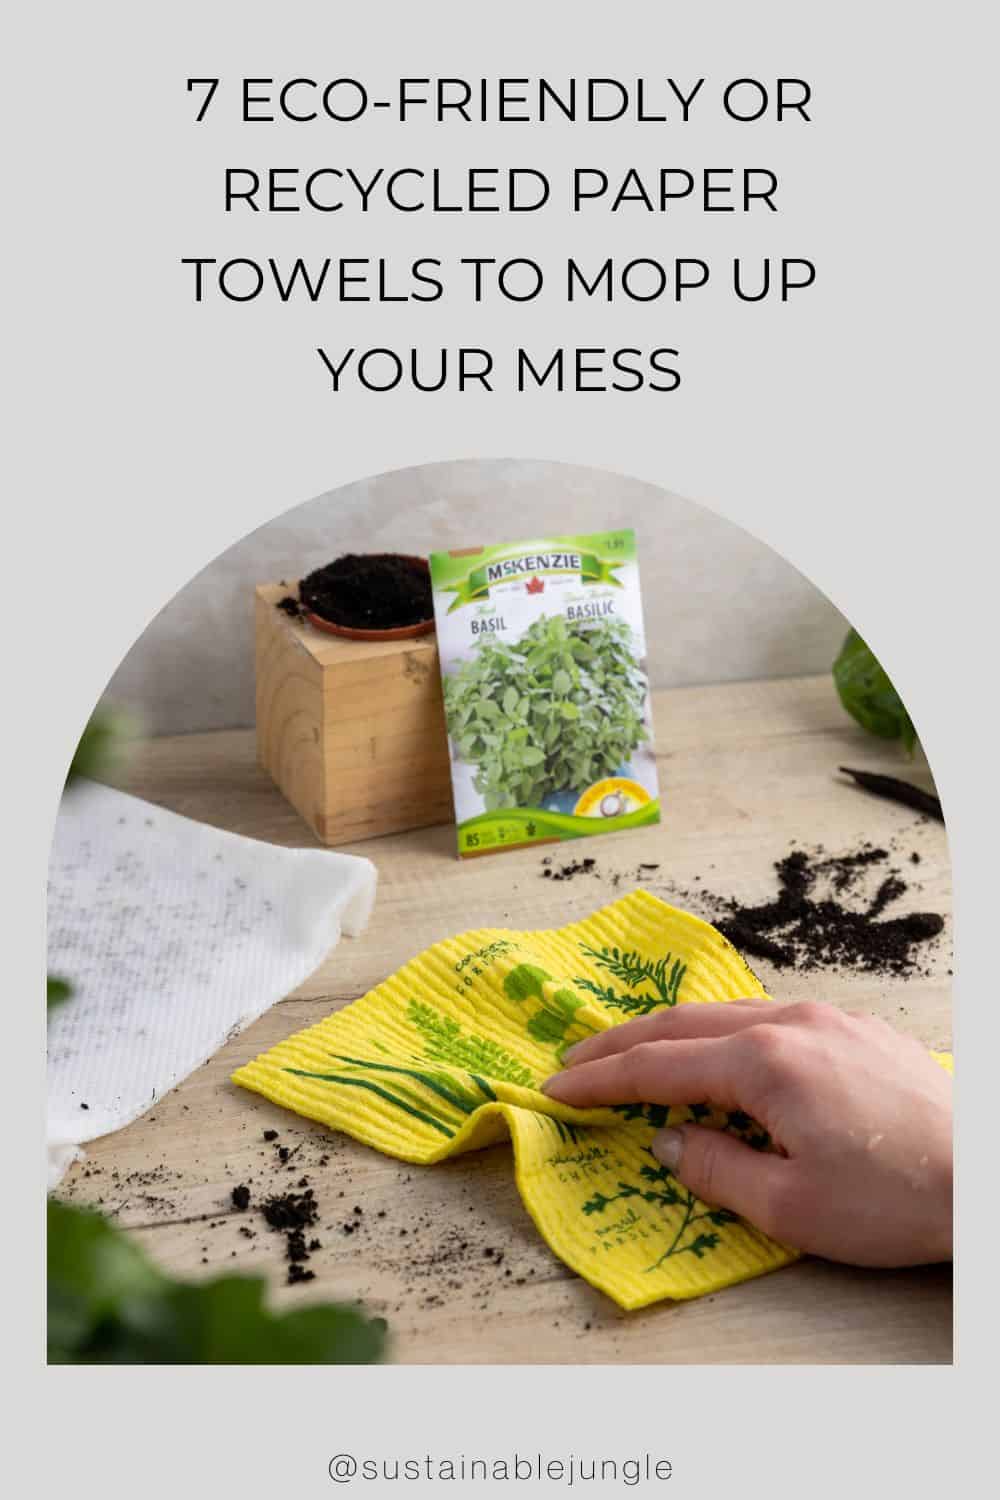 https://www.sustainablejungle.com/wp-content/uploads/2023/02/Recycled-Paper-Towels-2023-P2.jpg